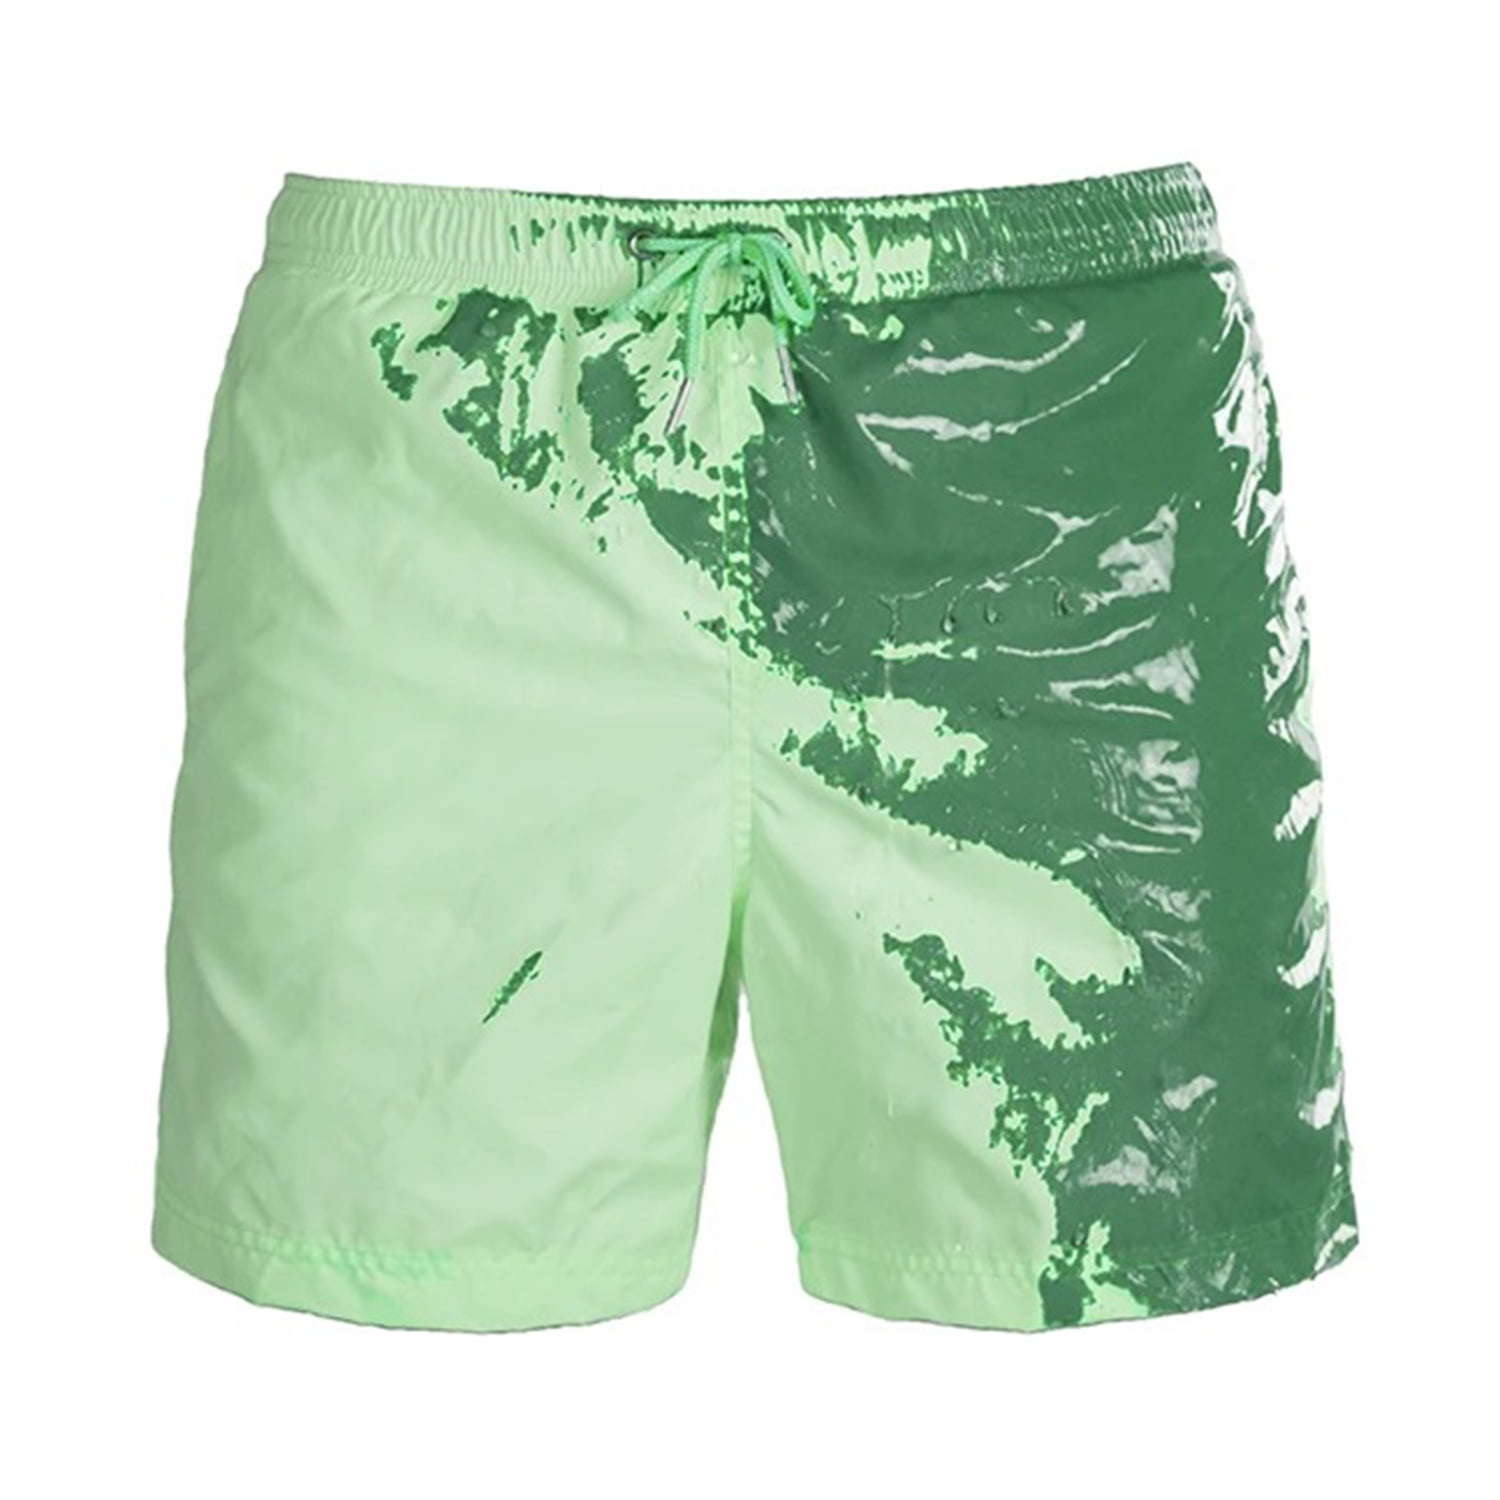 Kamo Color Changing Swim Trunks Summer Cool Quick Dry Board Shorts with ...